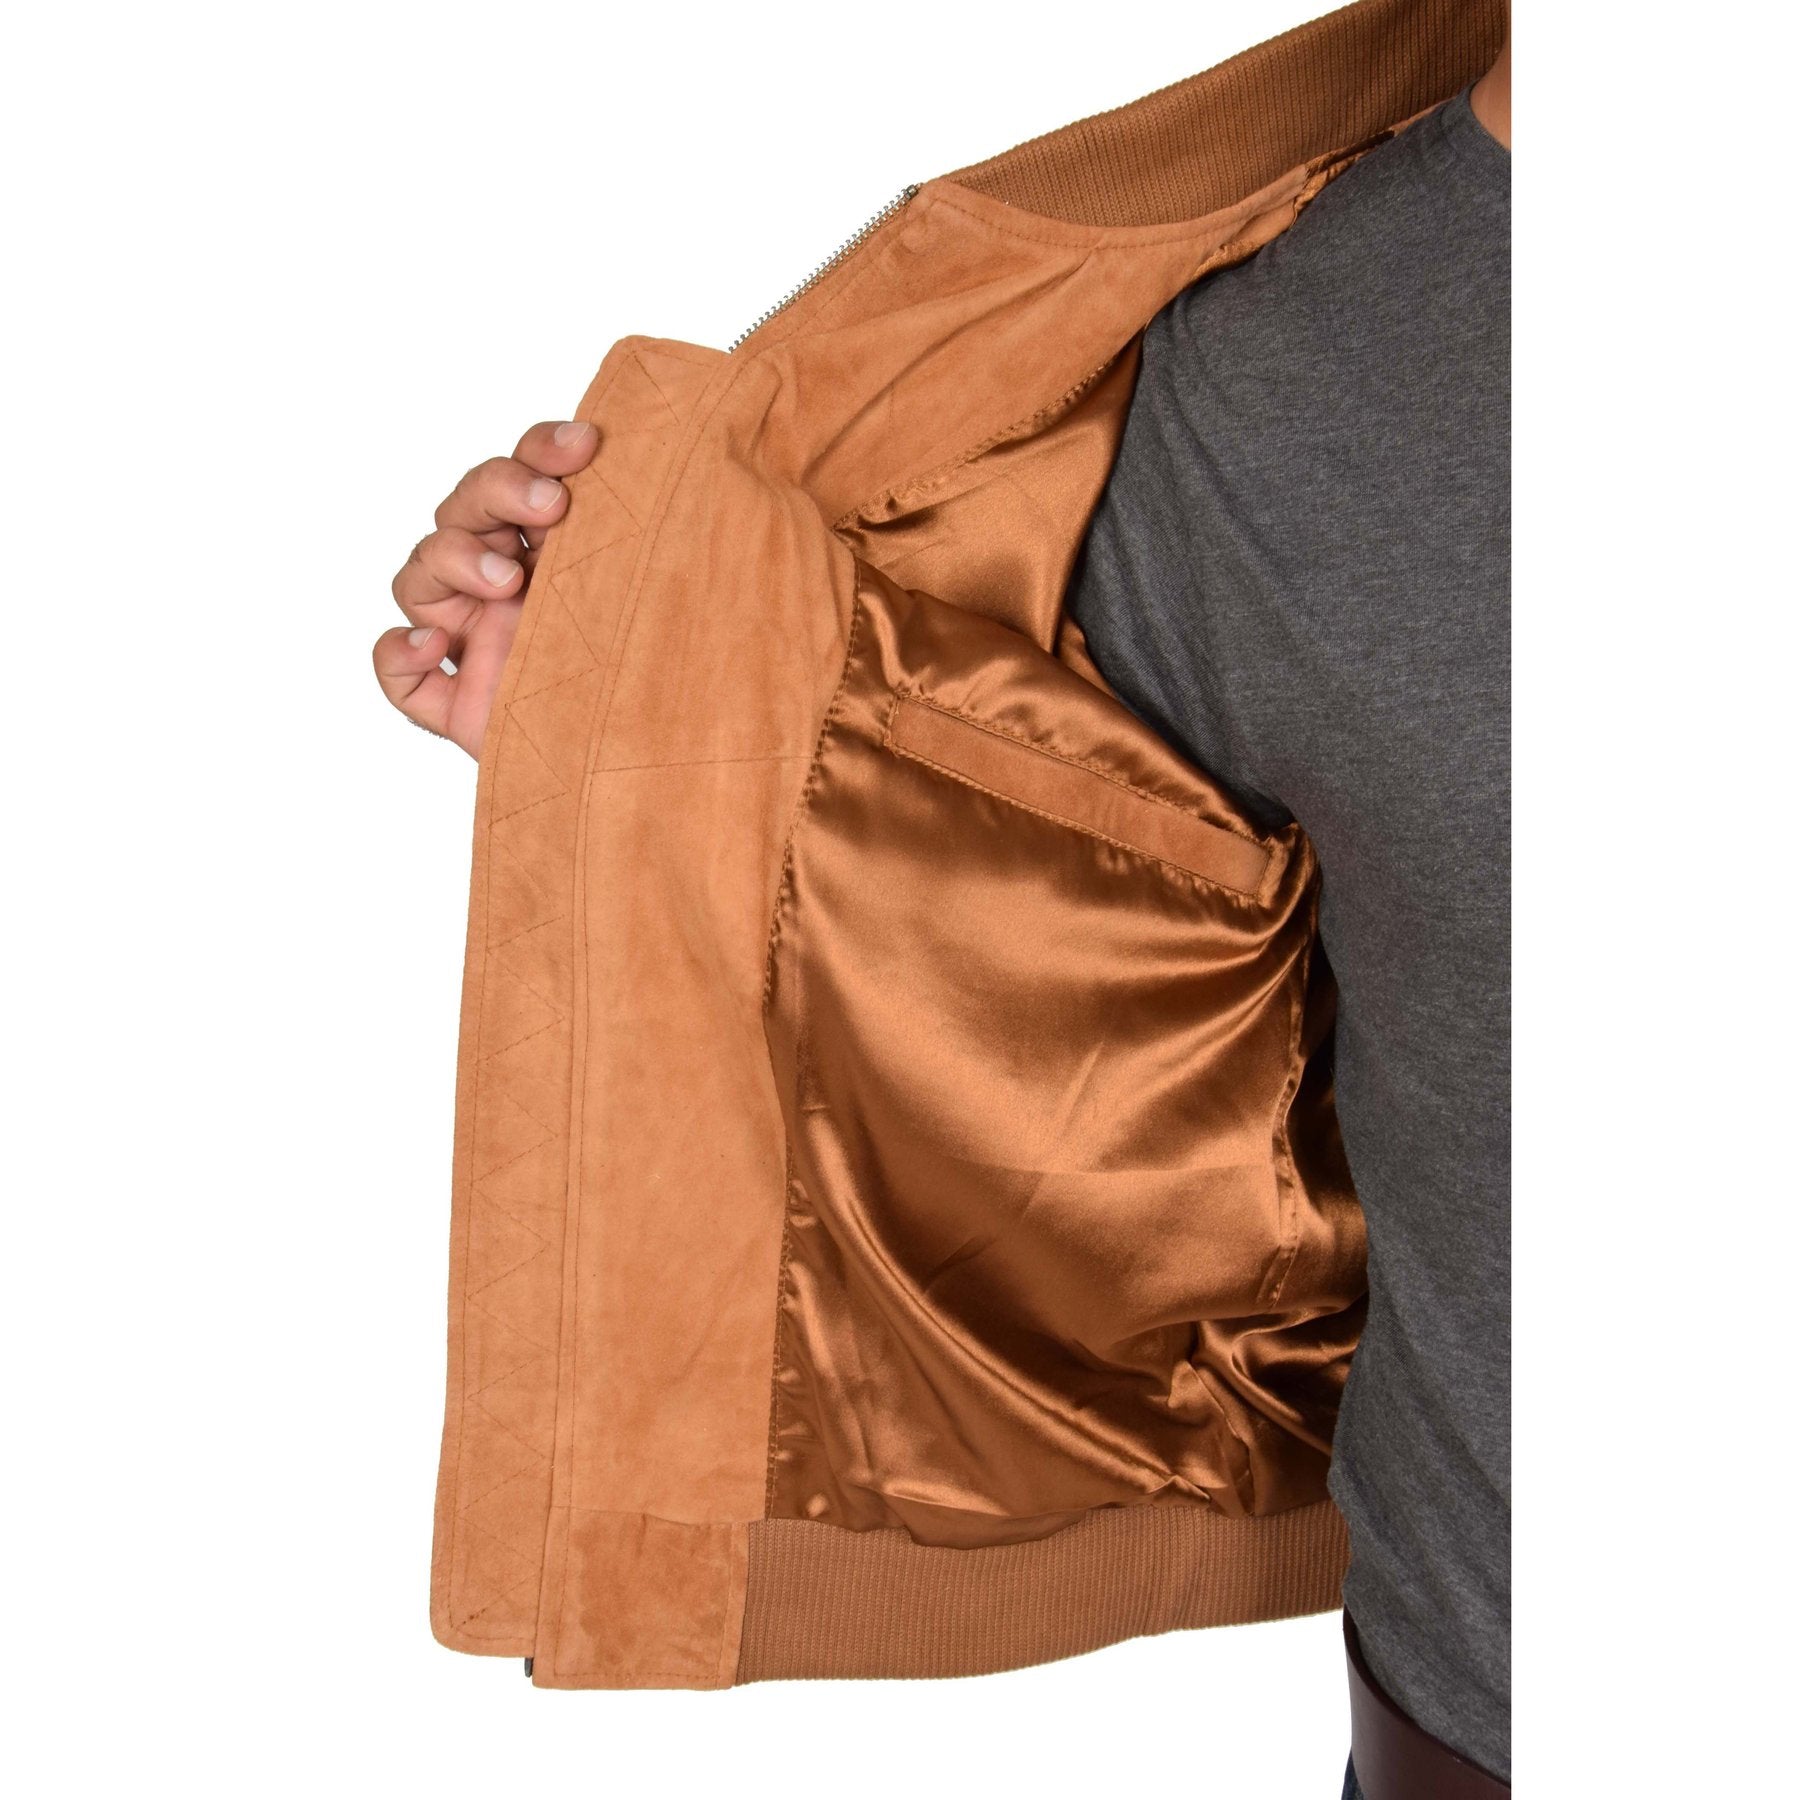 Spine Spark Tan Soft Suede Leather Bomber Style Jacket